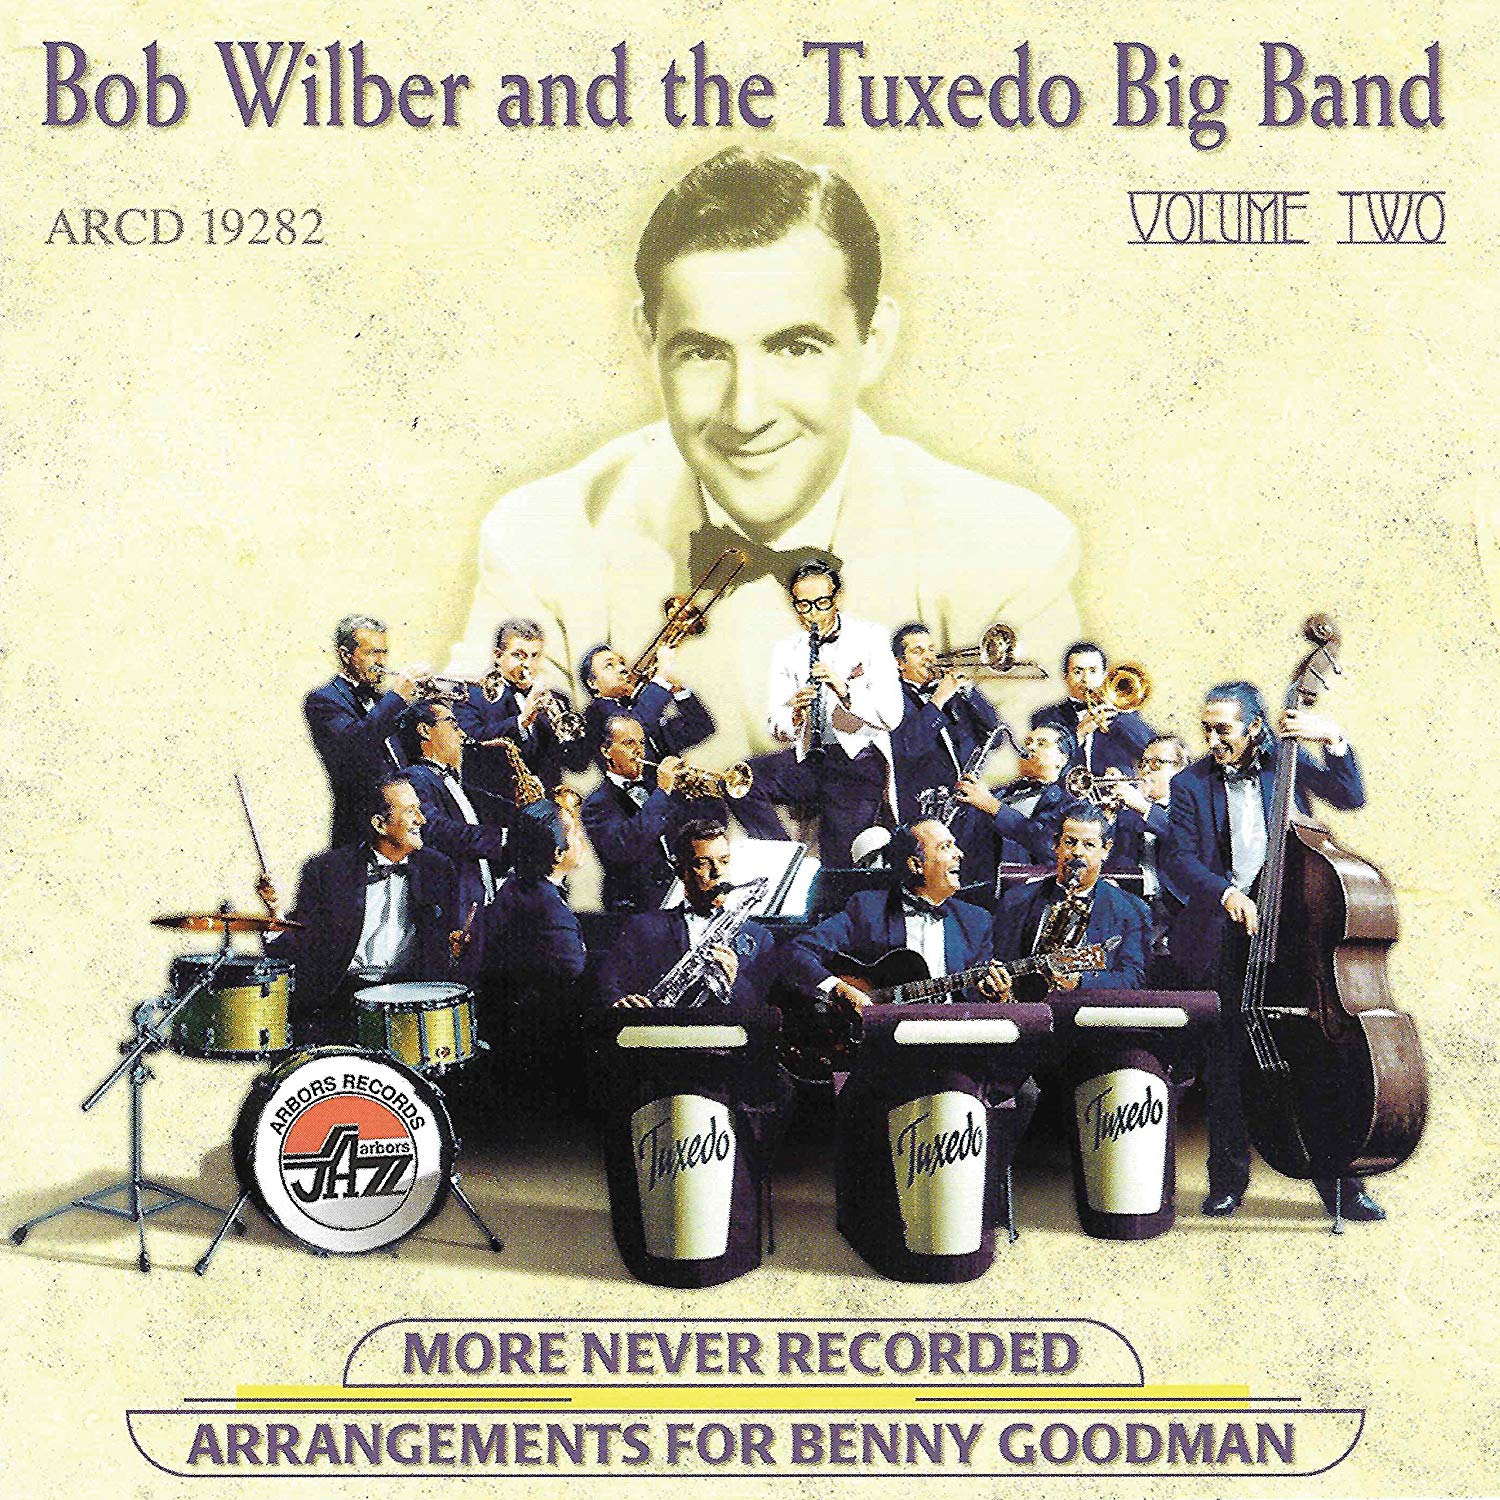 BOB WILBER - Bob Wilber, Tuxedo Big Band ‎: More never recorded arrangements for Benny Goodman, Volume Two cover 